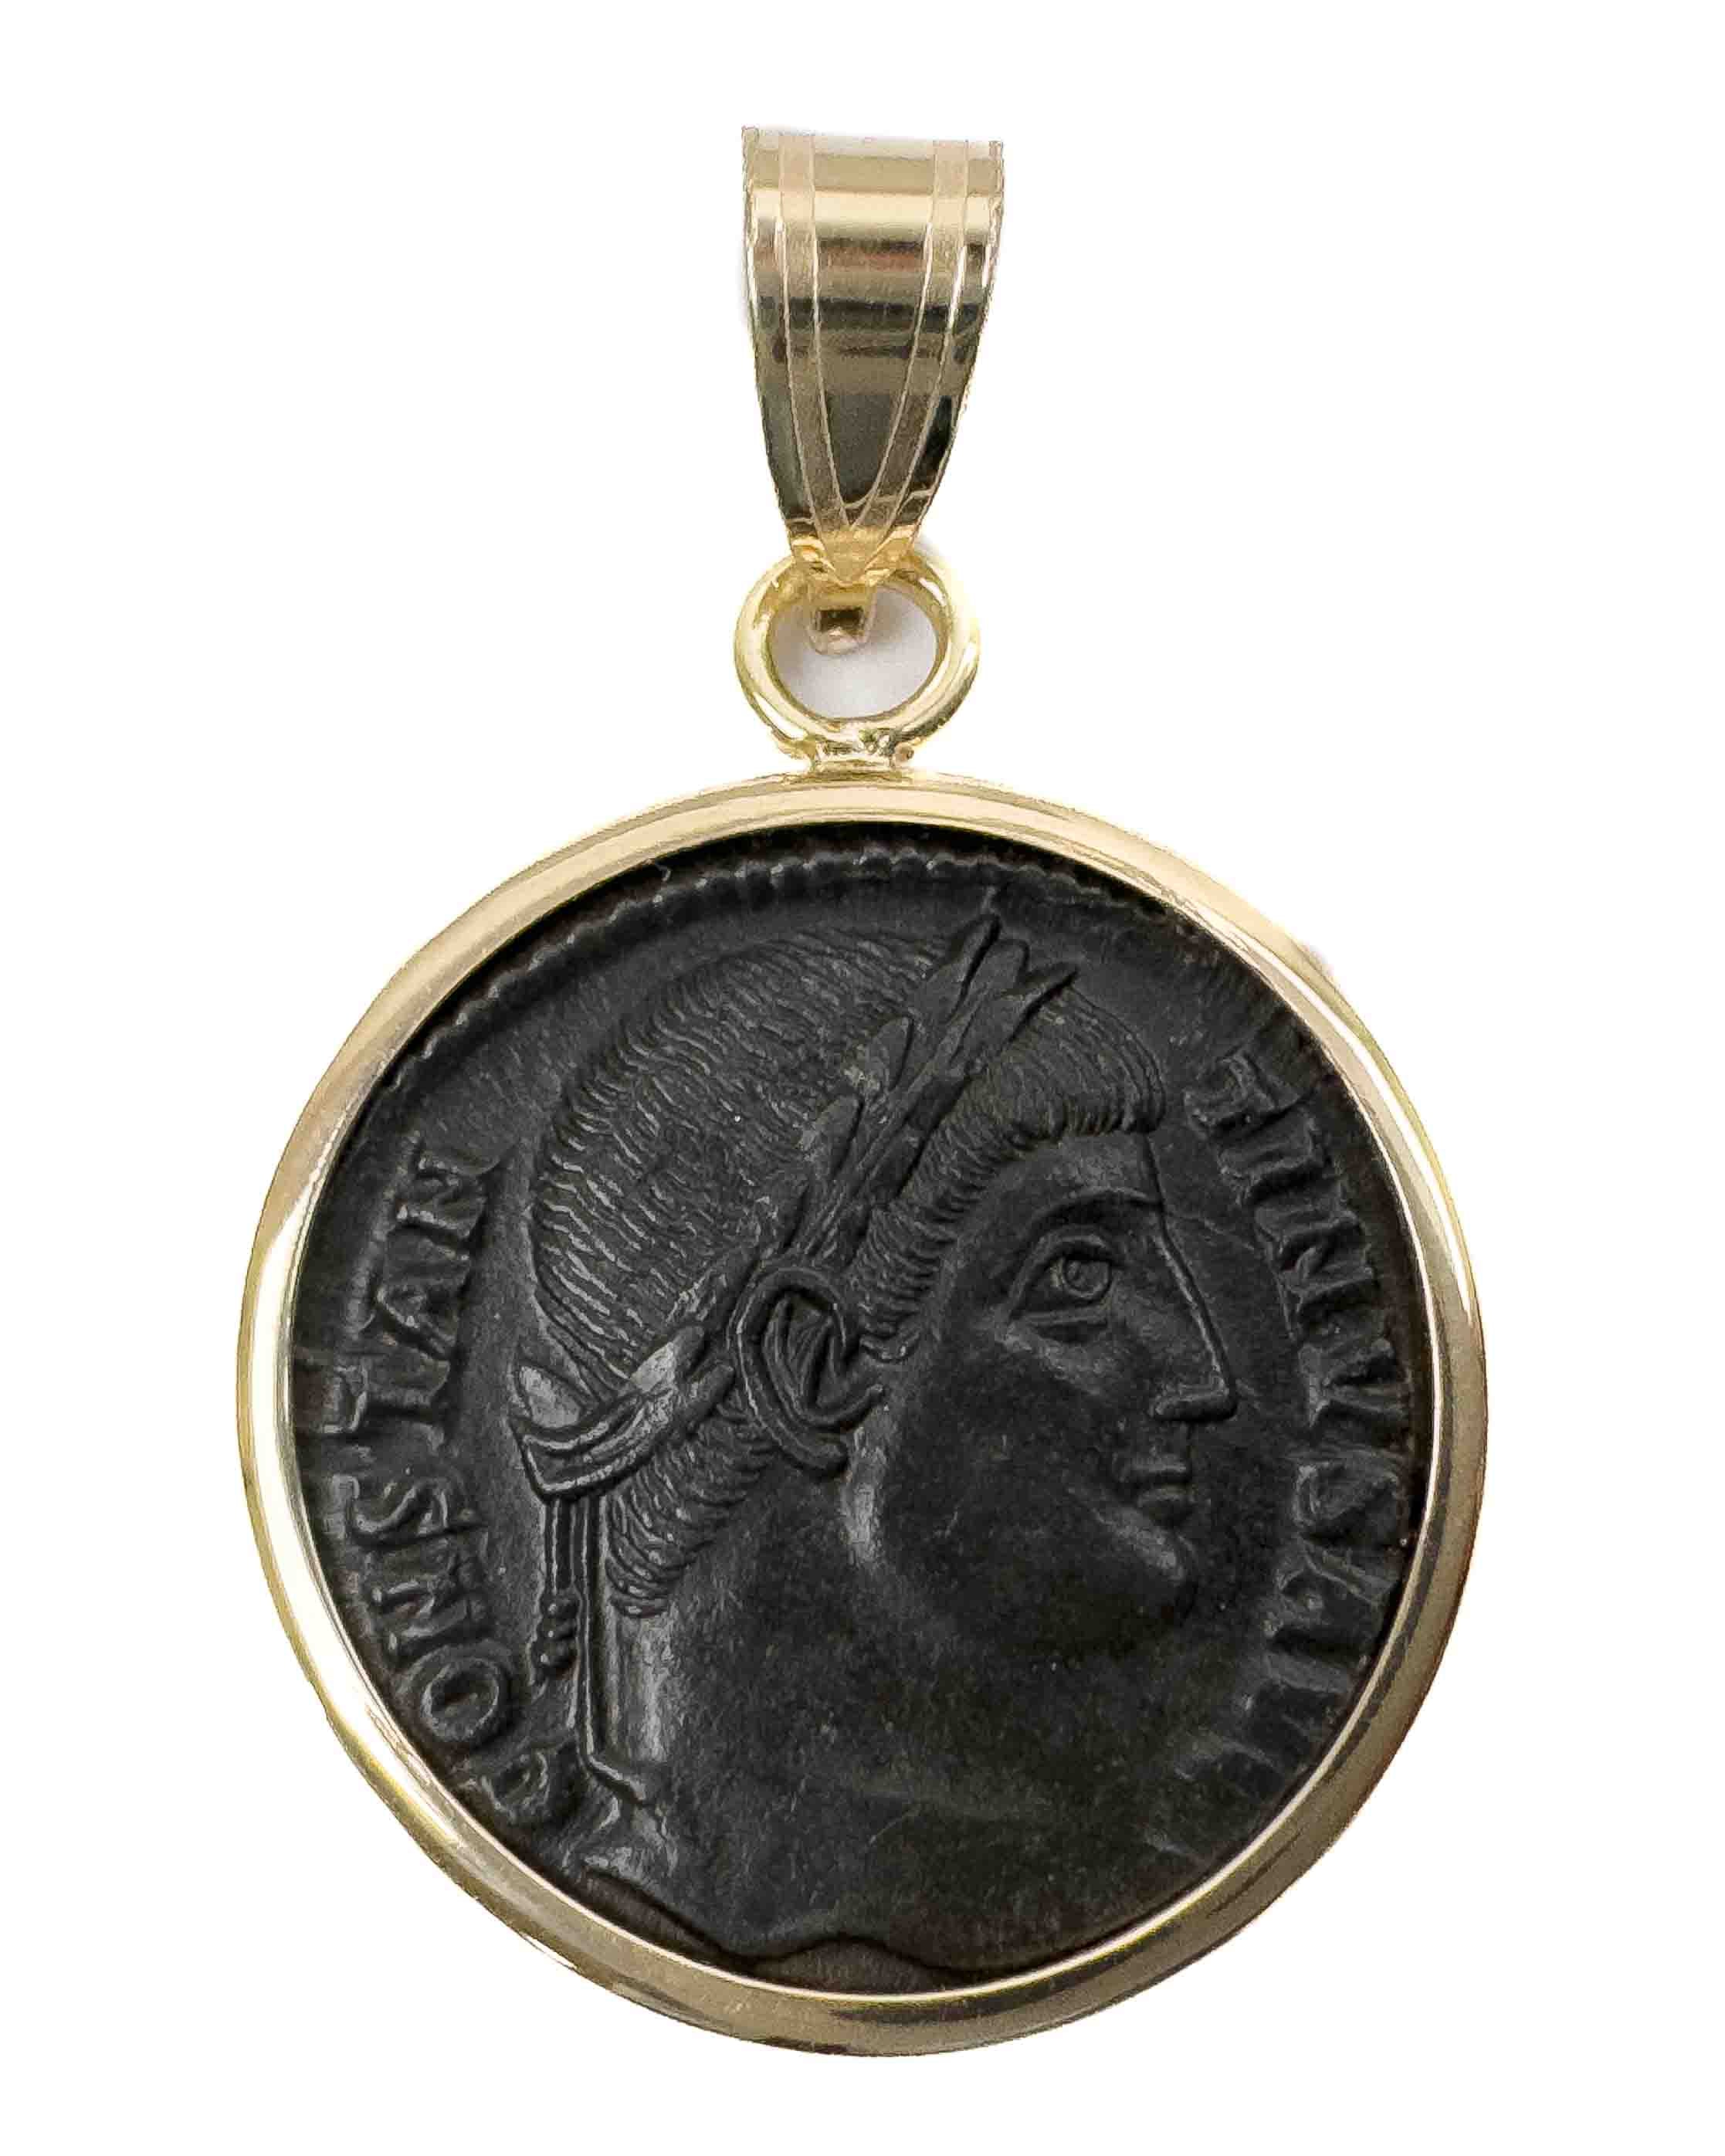 10k Gold Genuine Ancient Roman Coin Pendant (Constantine the Great; 328-329 A.D.)